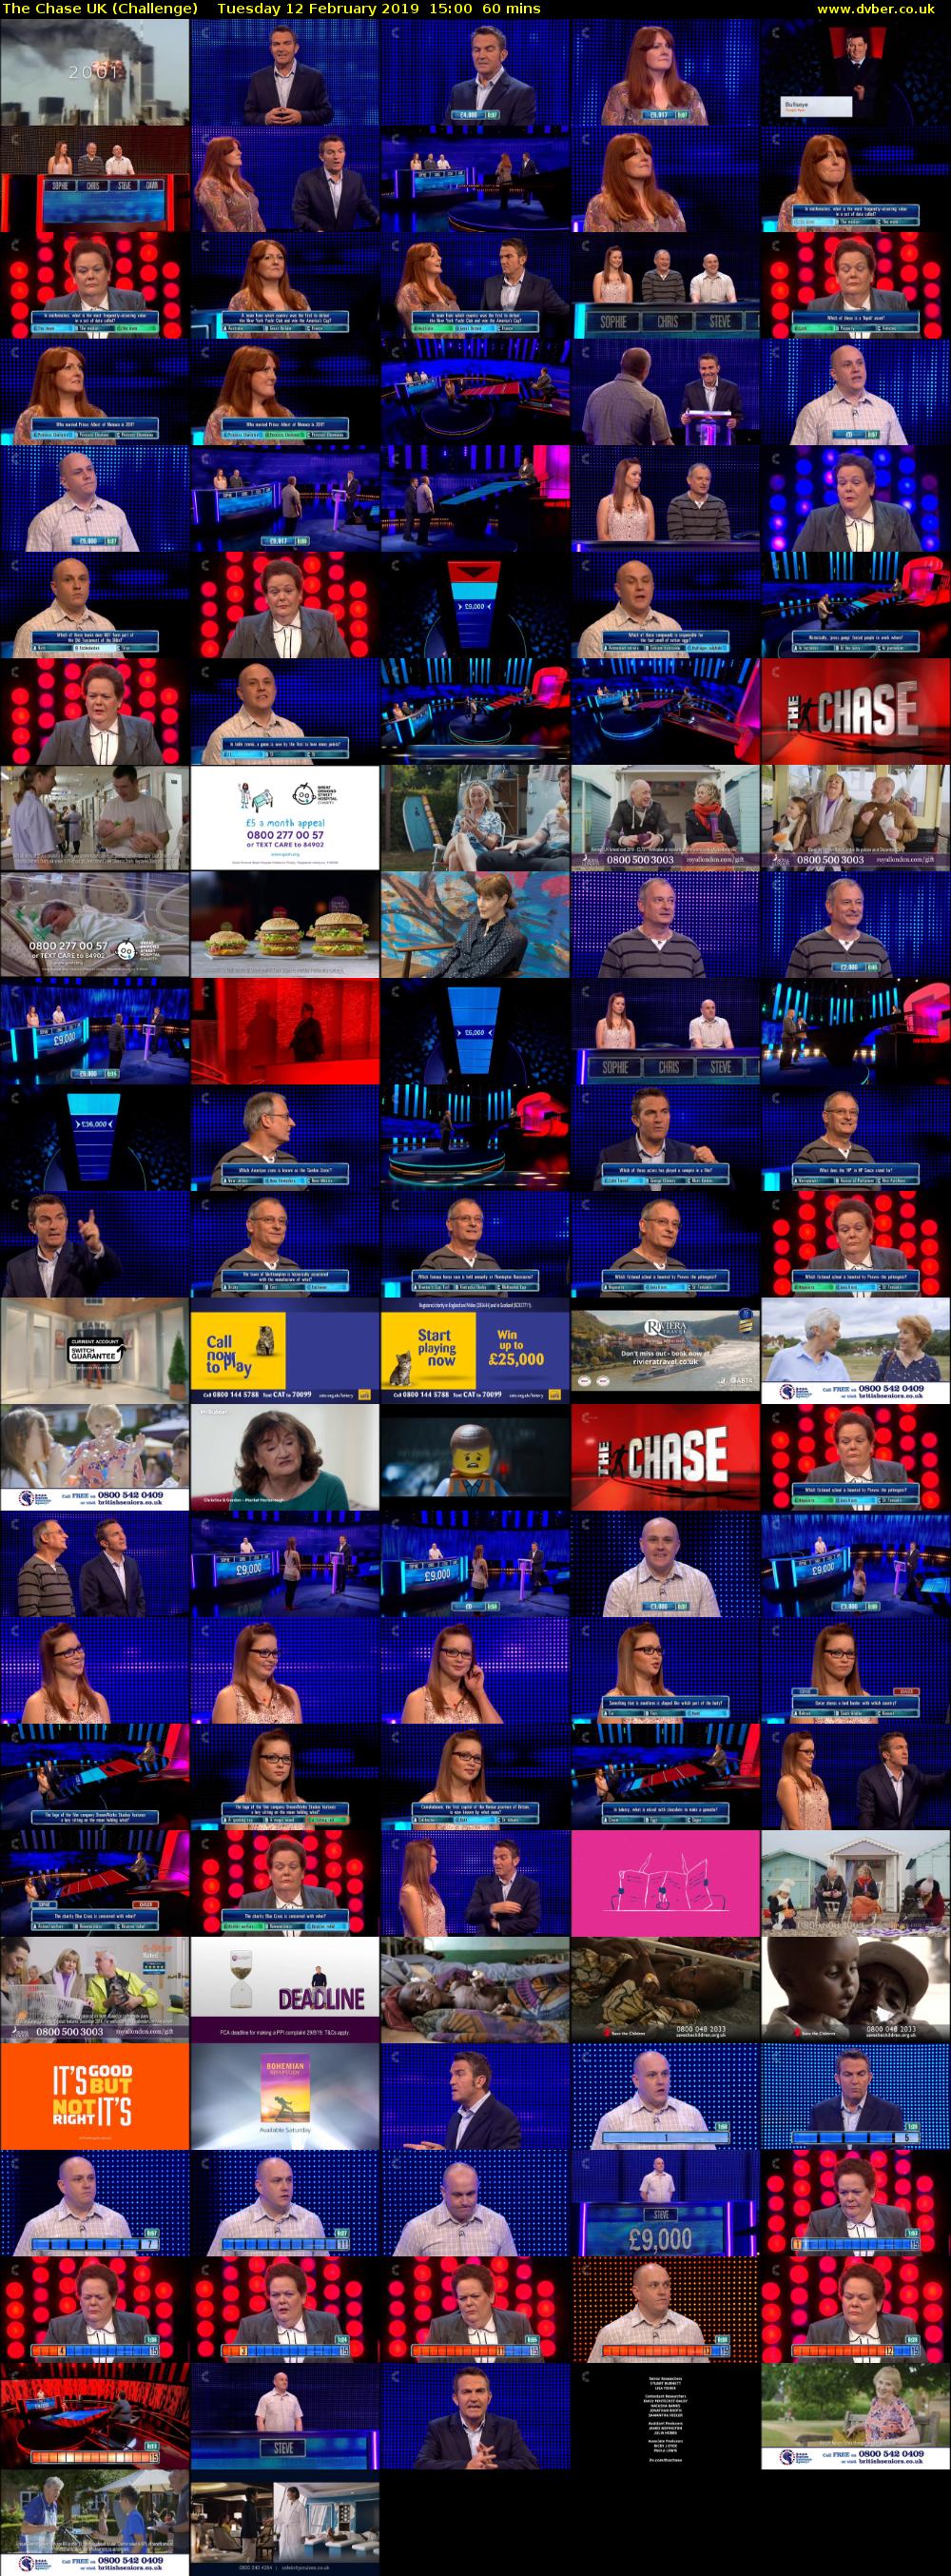 The Chase UK (Challenge) Tuesday 12 February 2019 15:00 - 16:00